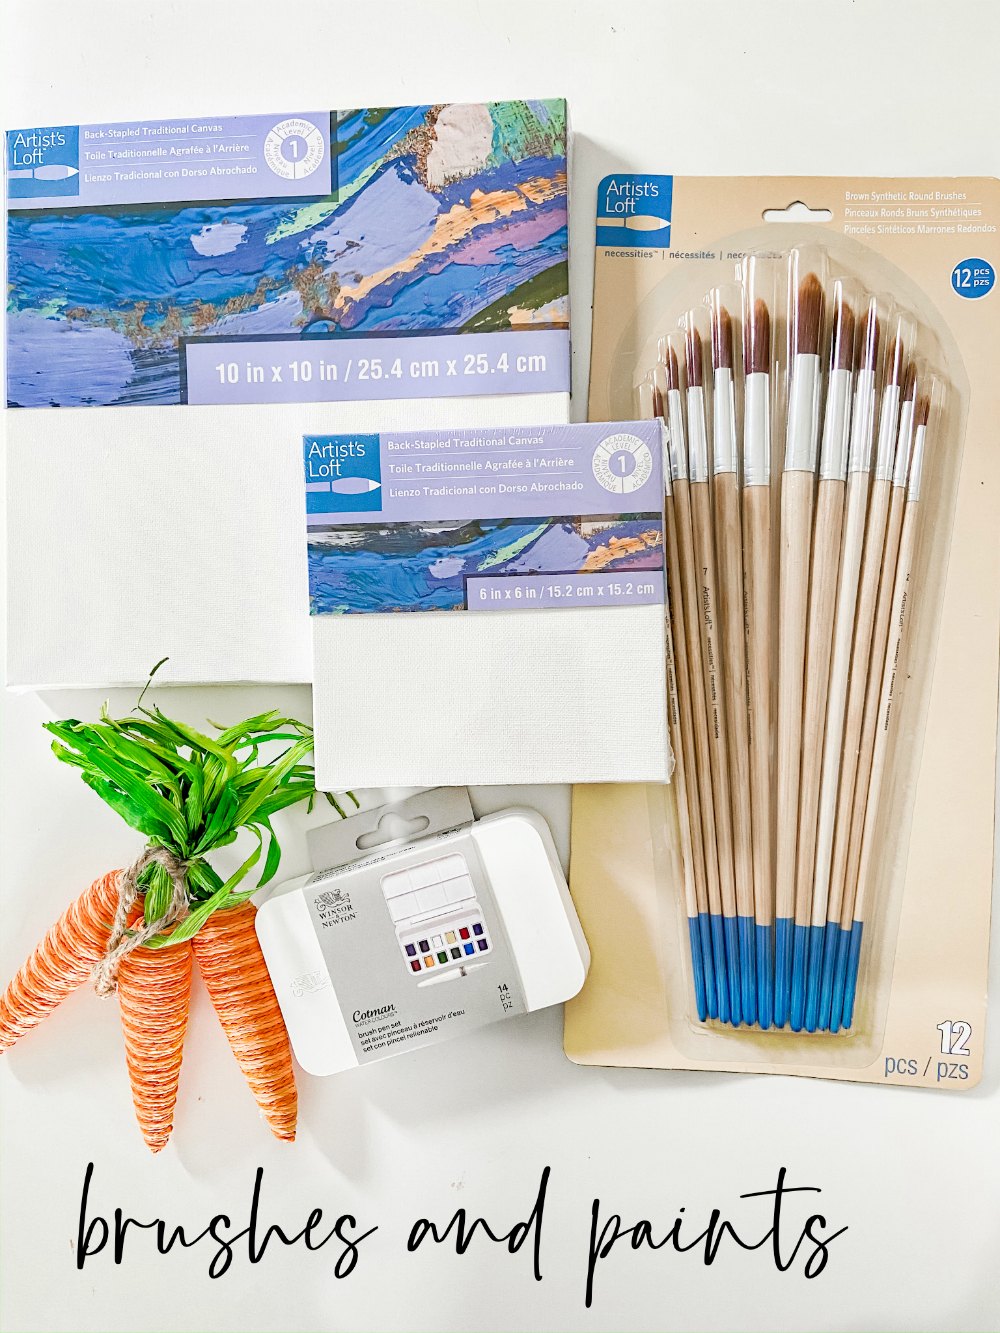 Easter Basket for the Creative Person in your Life! Fill a basket this Easter with useful art supplies that will provide hours of creative expression and joy for months to come! 